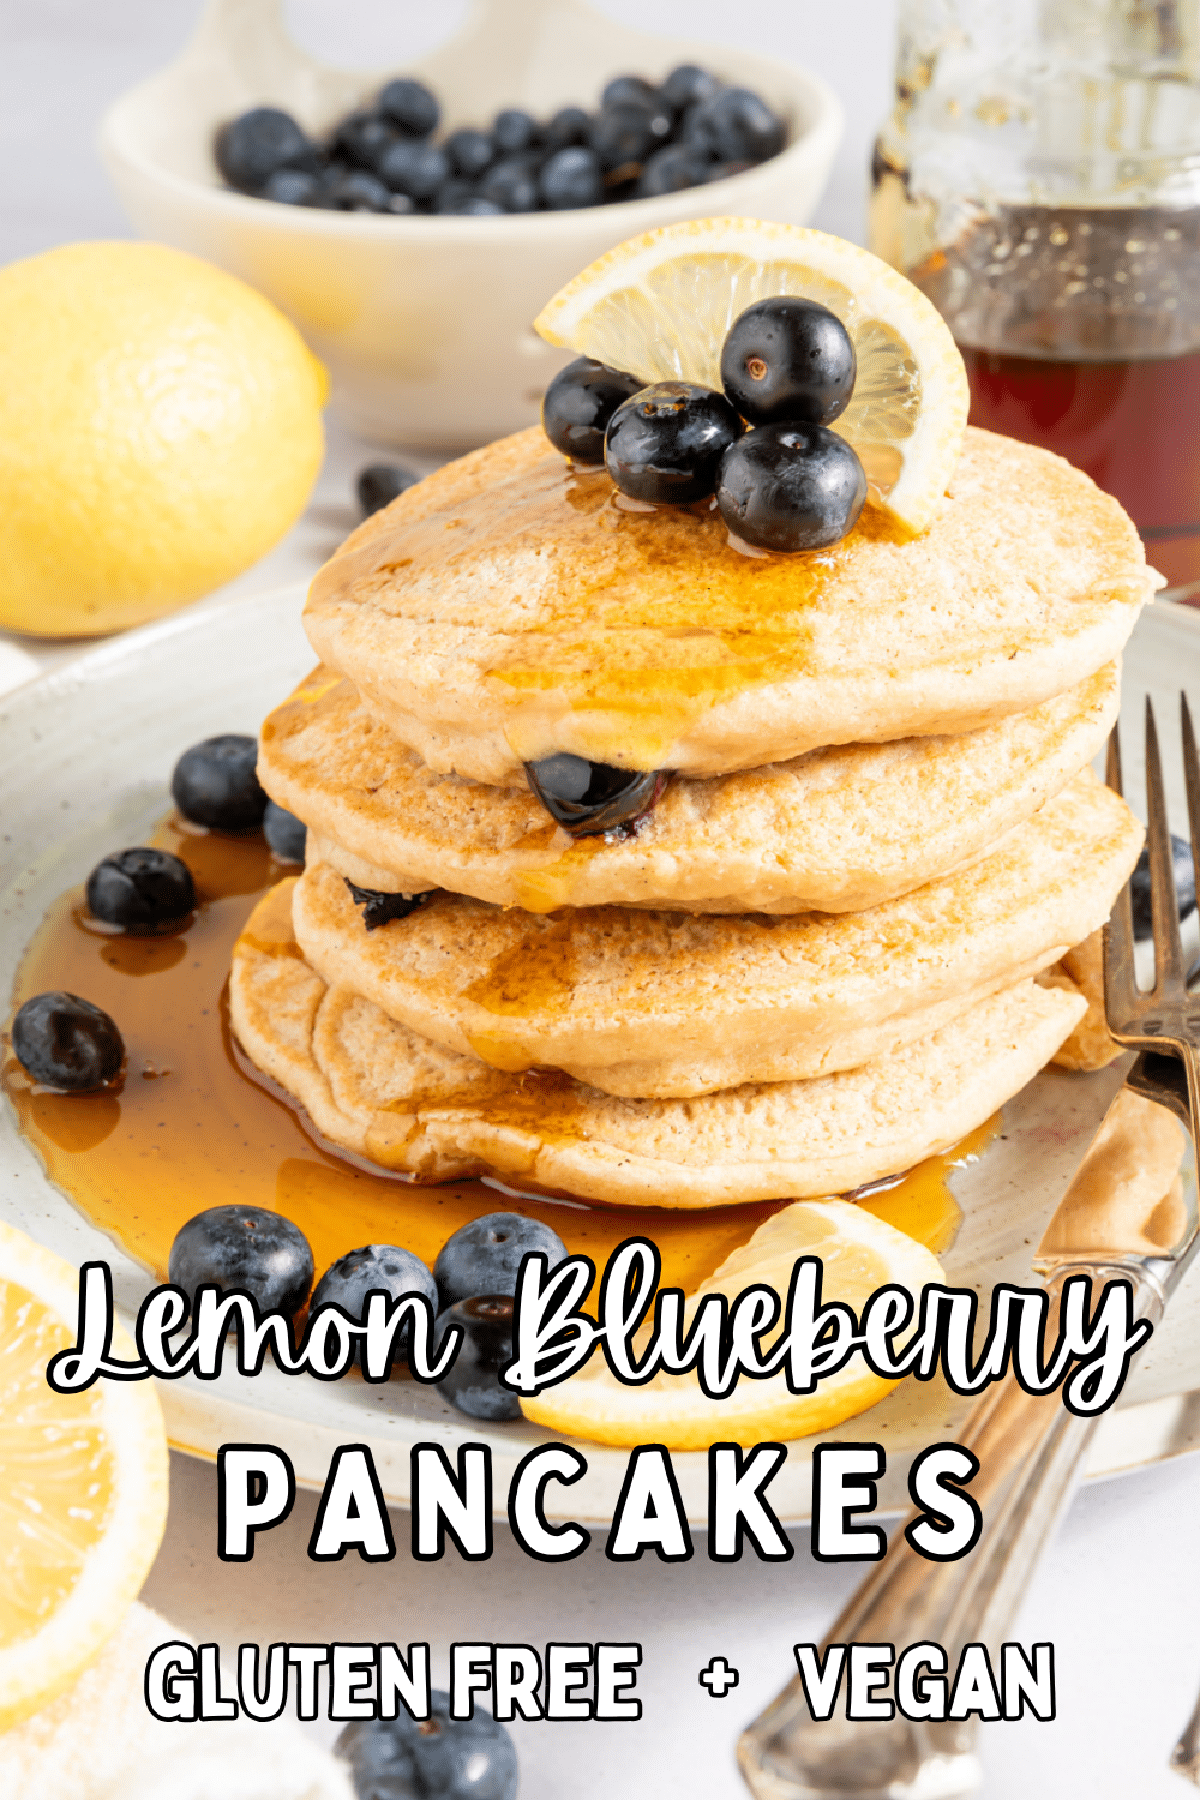 A stack of pancakes on a rustic white plate, garnished with fresh blueberries, lemon slices, and syrup. A fork and knife sit on the plate, and there is one triangle bite cut out of the pancake stack.